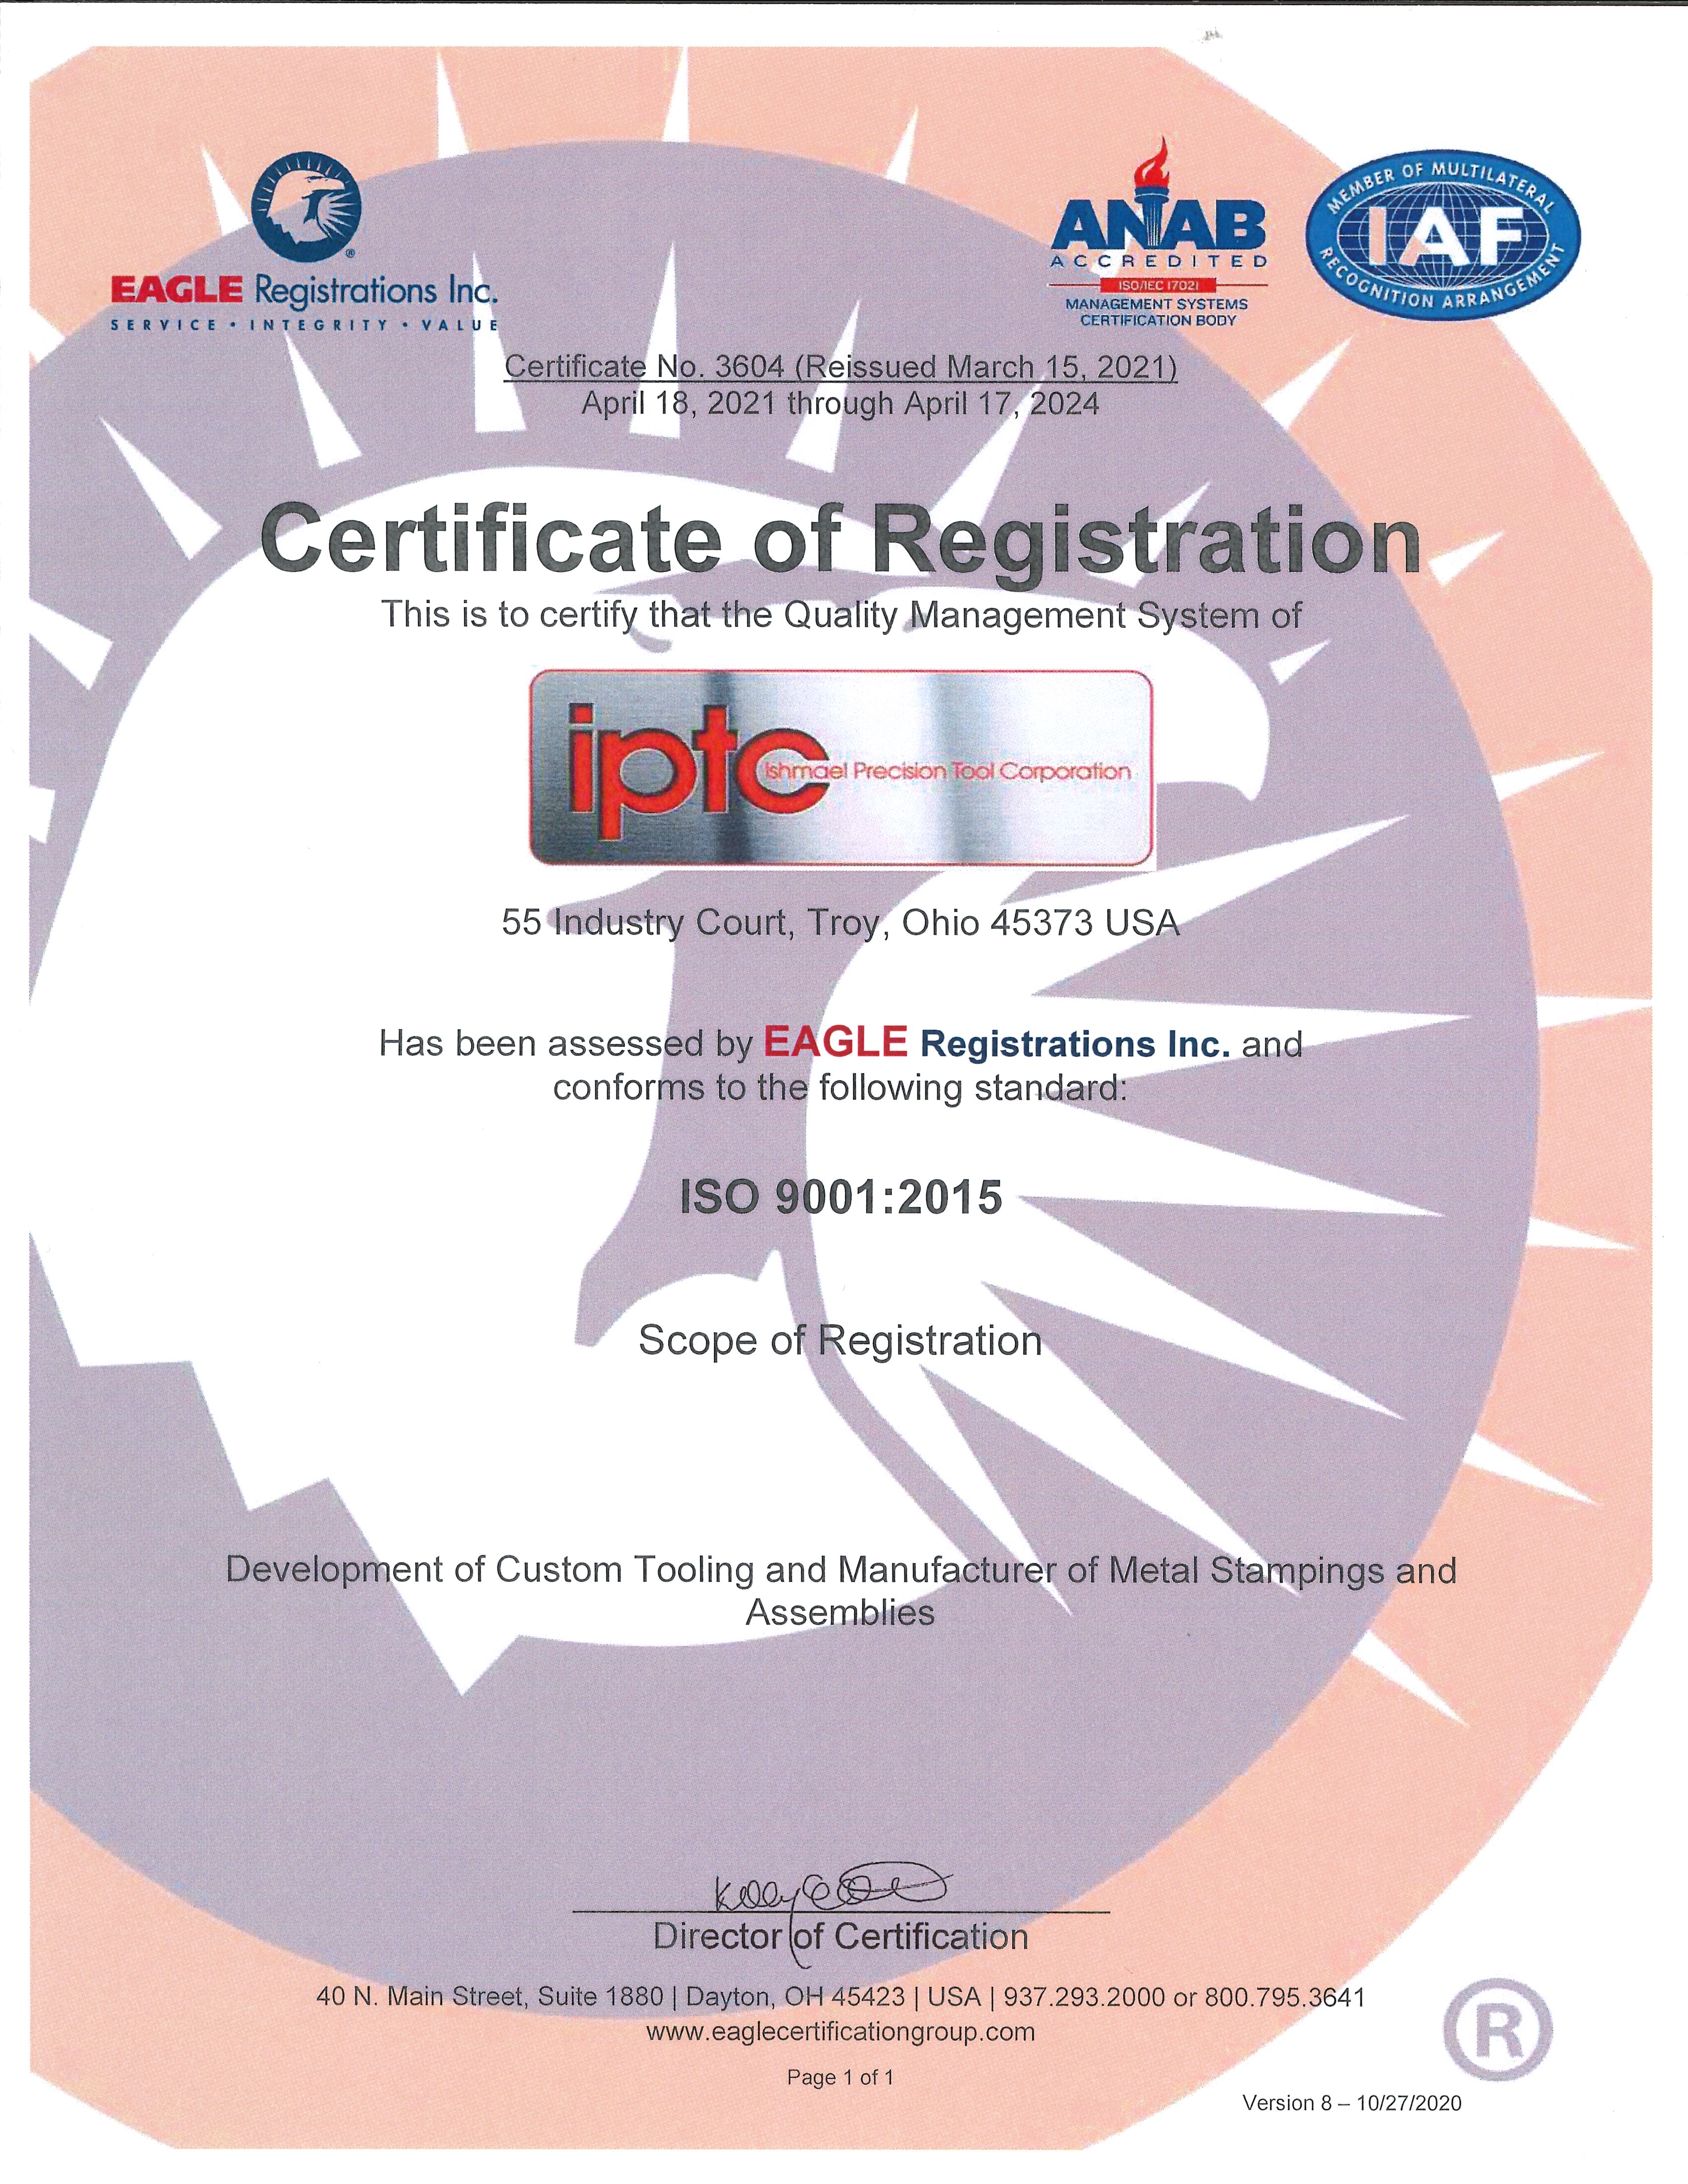 ISO 9001:2015 certs